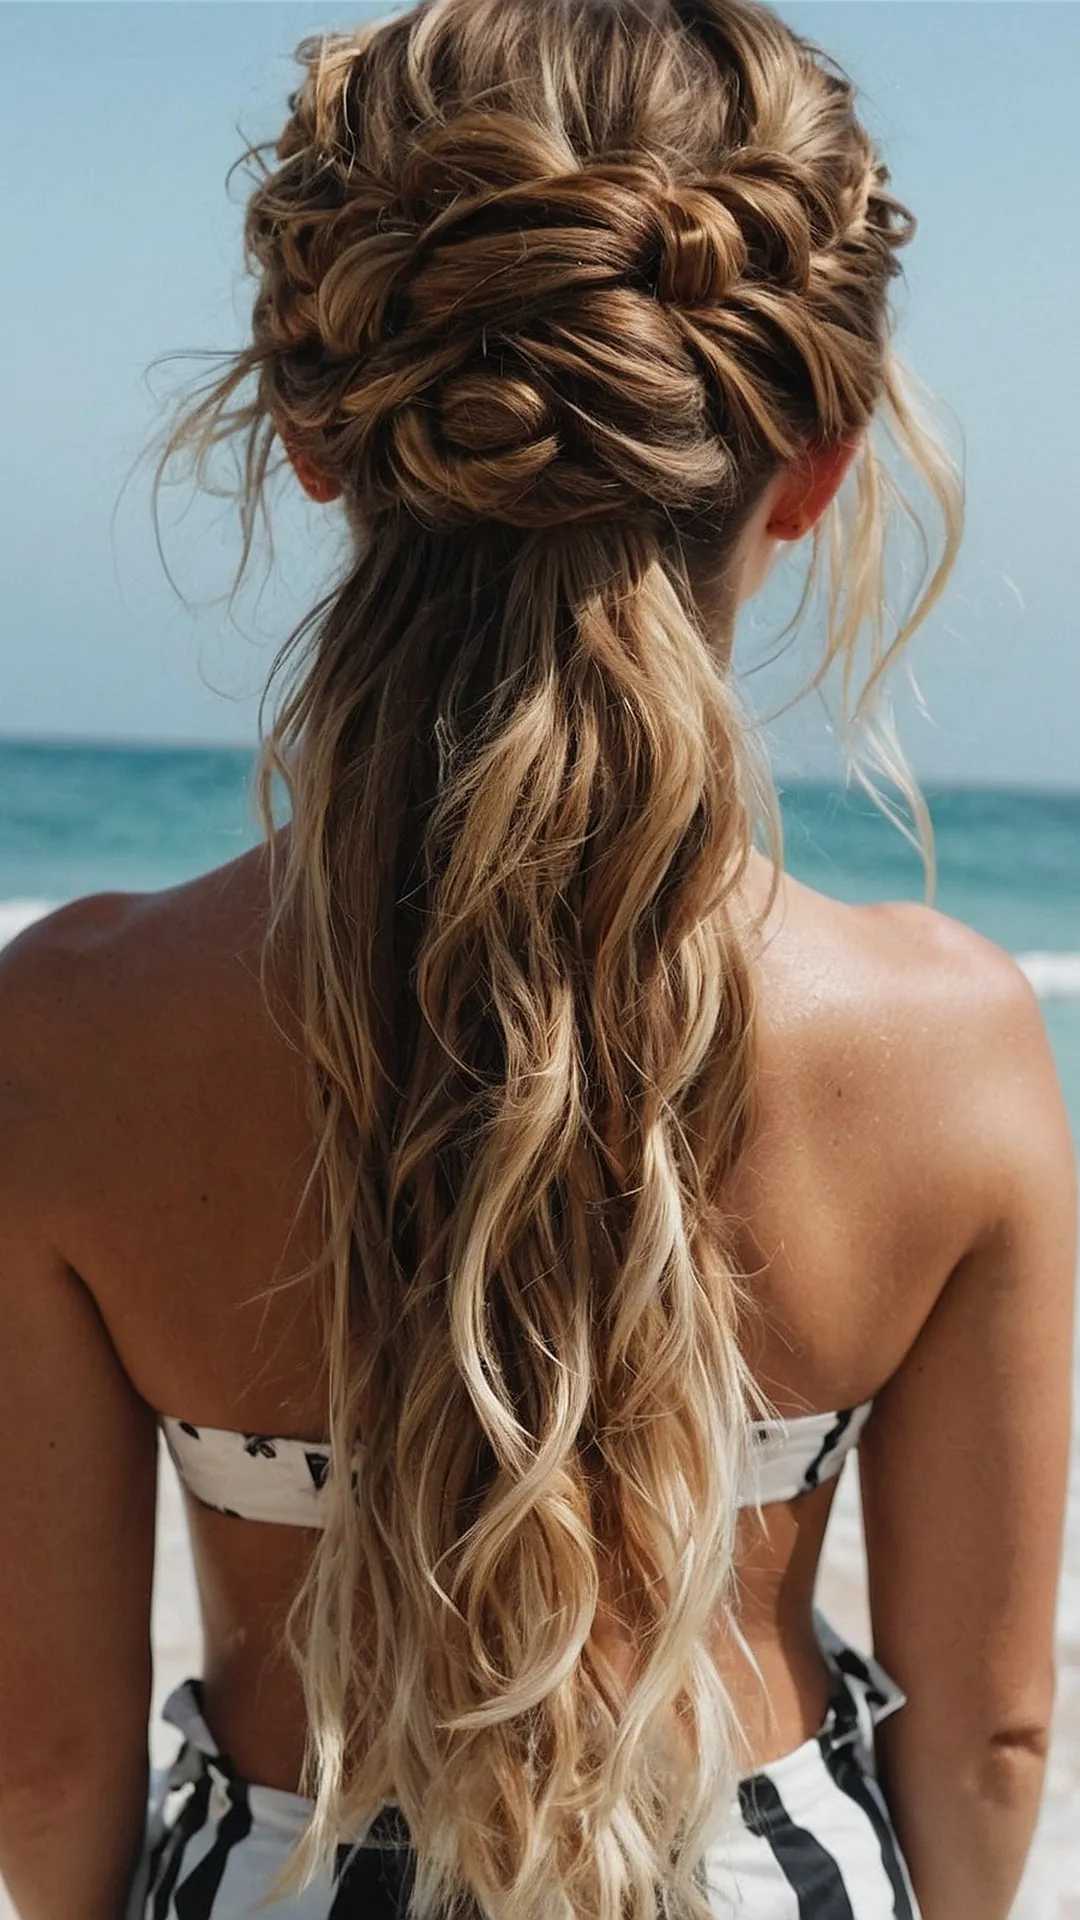 Tresses and Tides: Beachy Pool Hairstyles